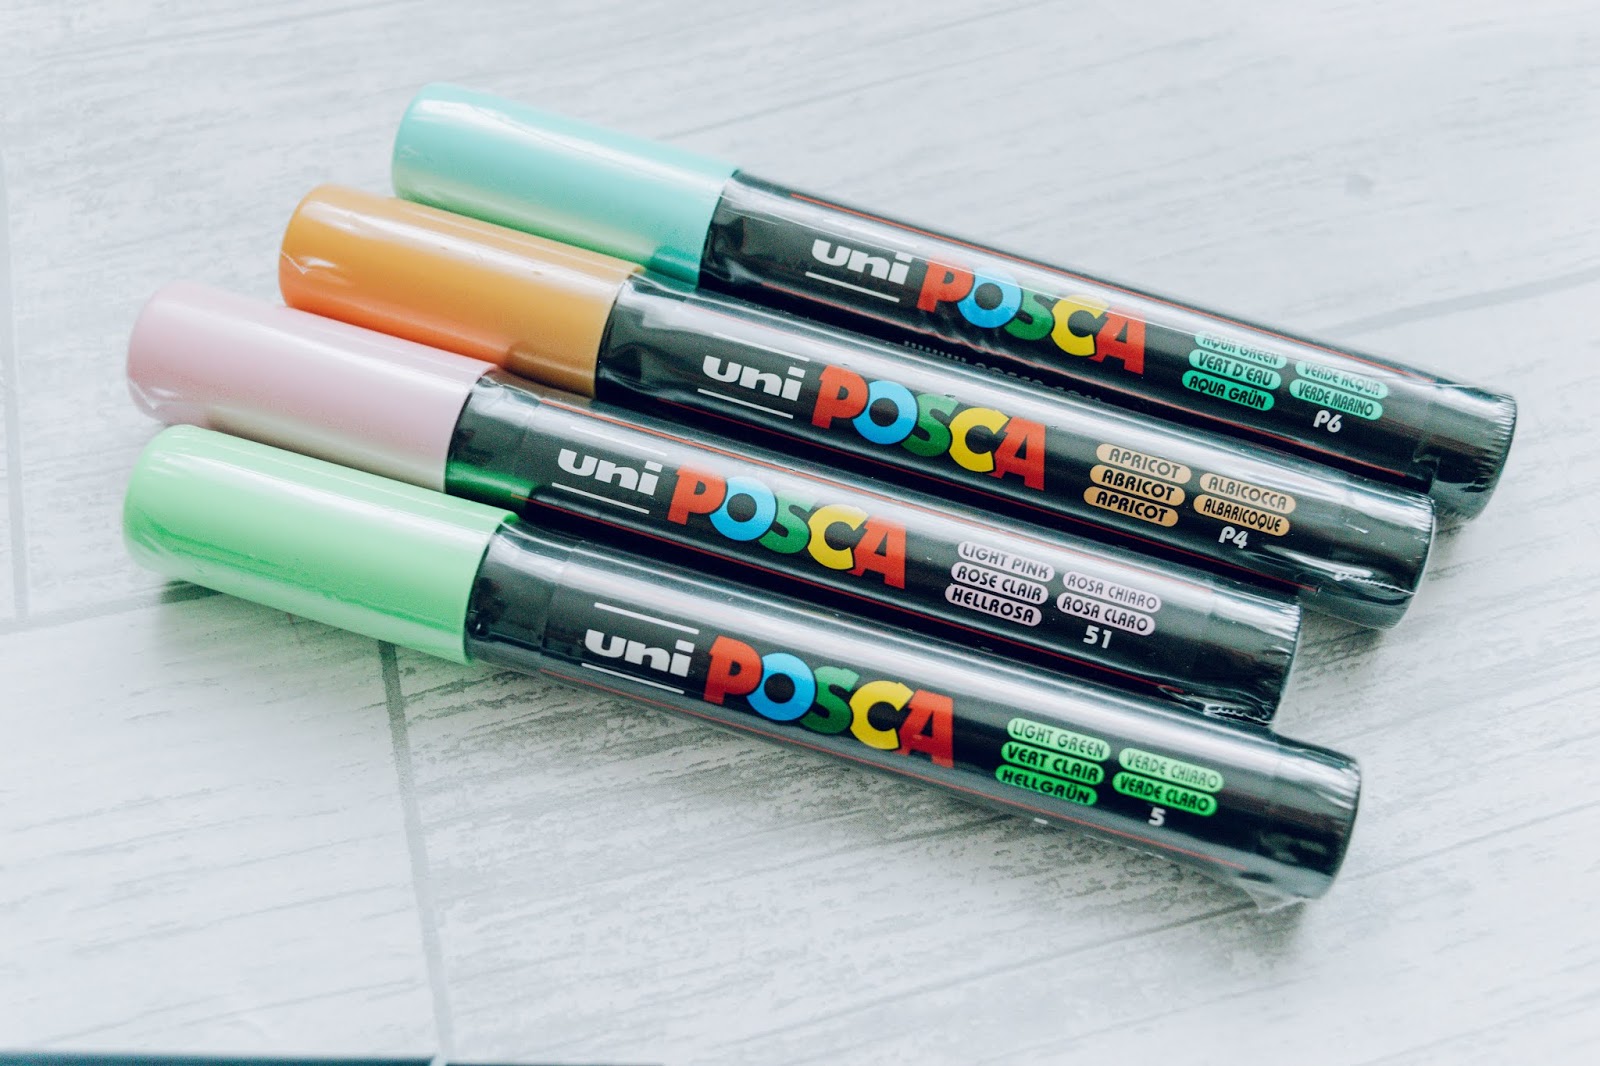 Four Posca pen paint markers in apricot, light green, light pink and aqua green.